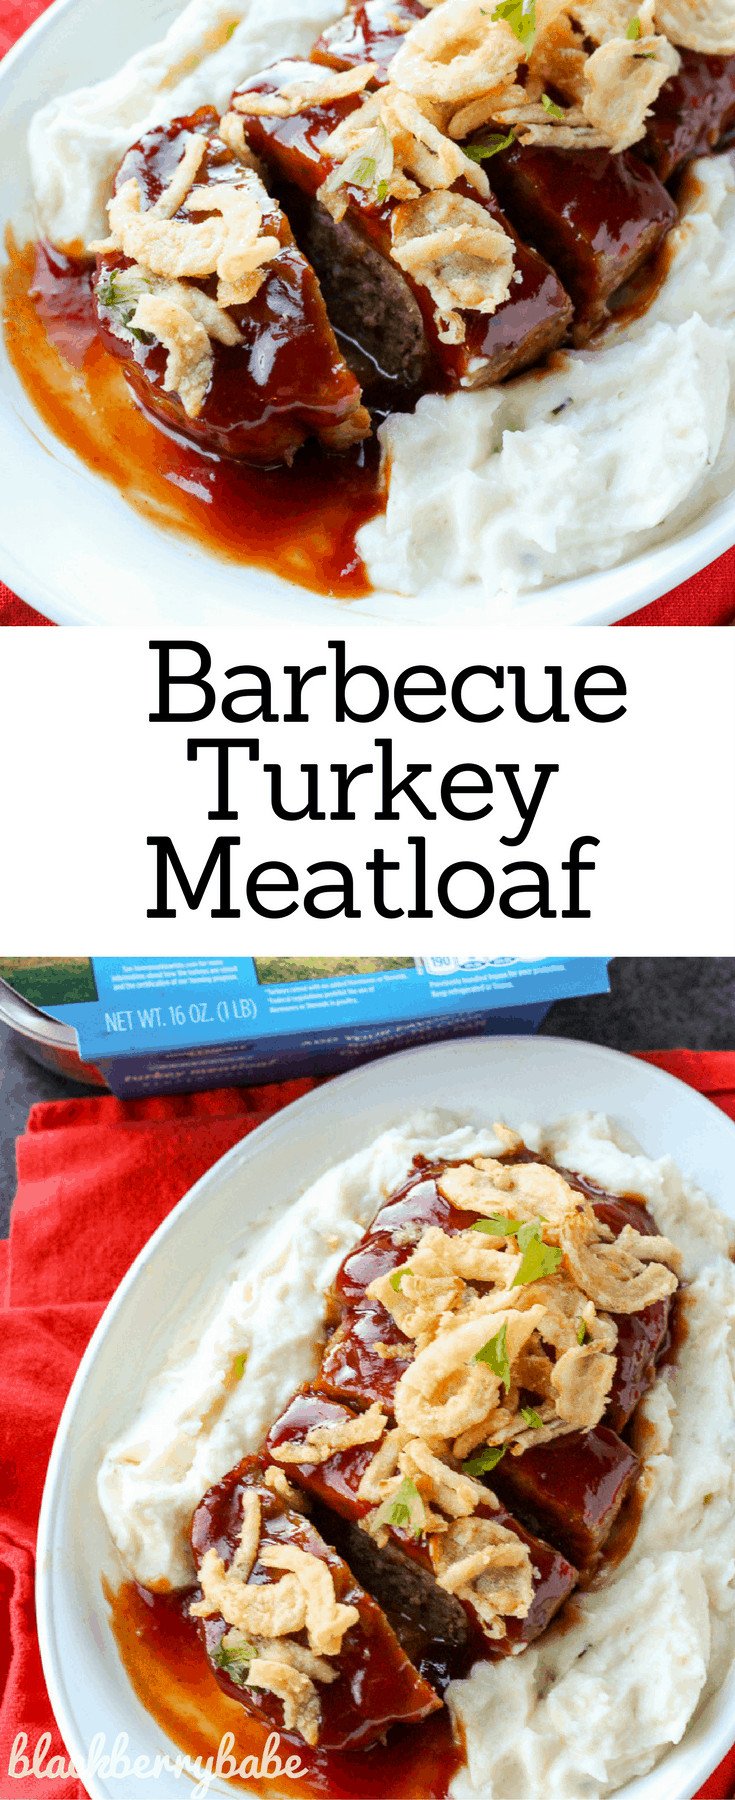 Barbeque Turkey Meatloaf
 Easy Barbecue Turkey Meatloaf Perfect for Weeknights